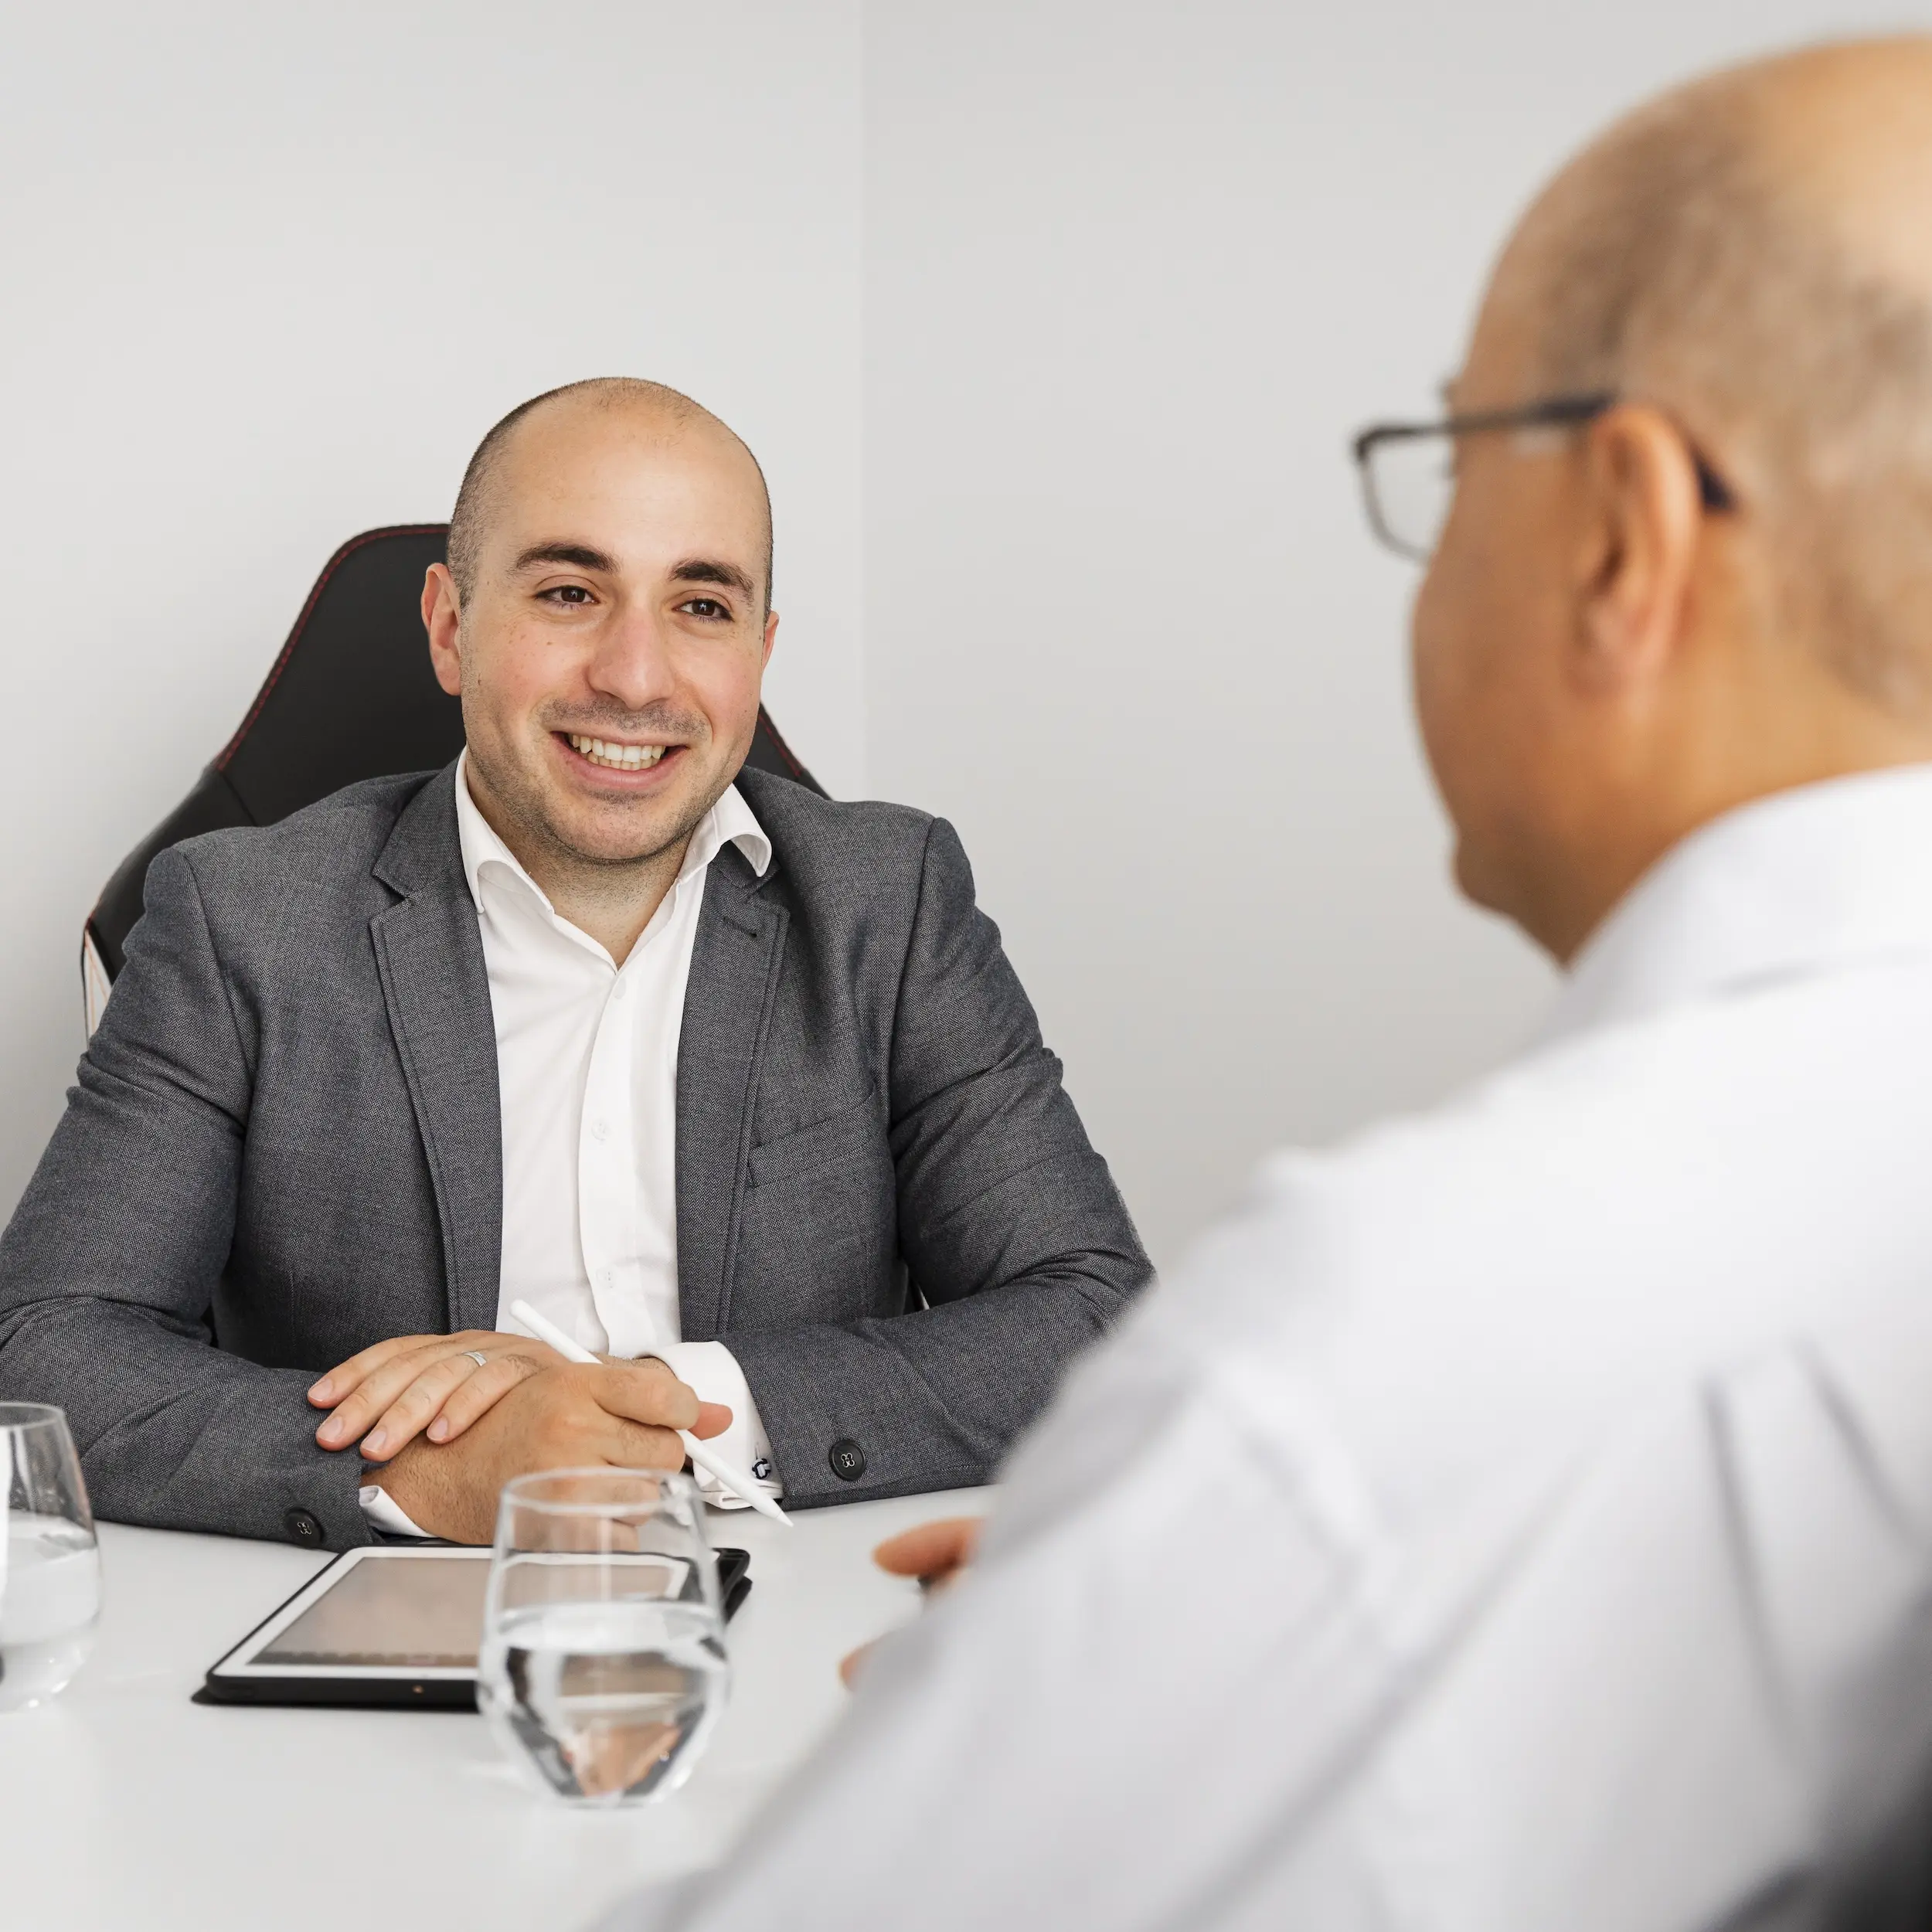 Robert Daniele speaking with a client in a meeting.